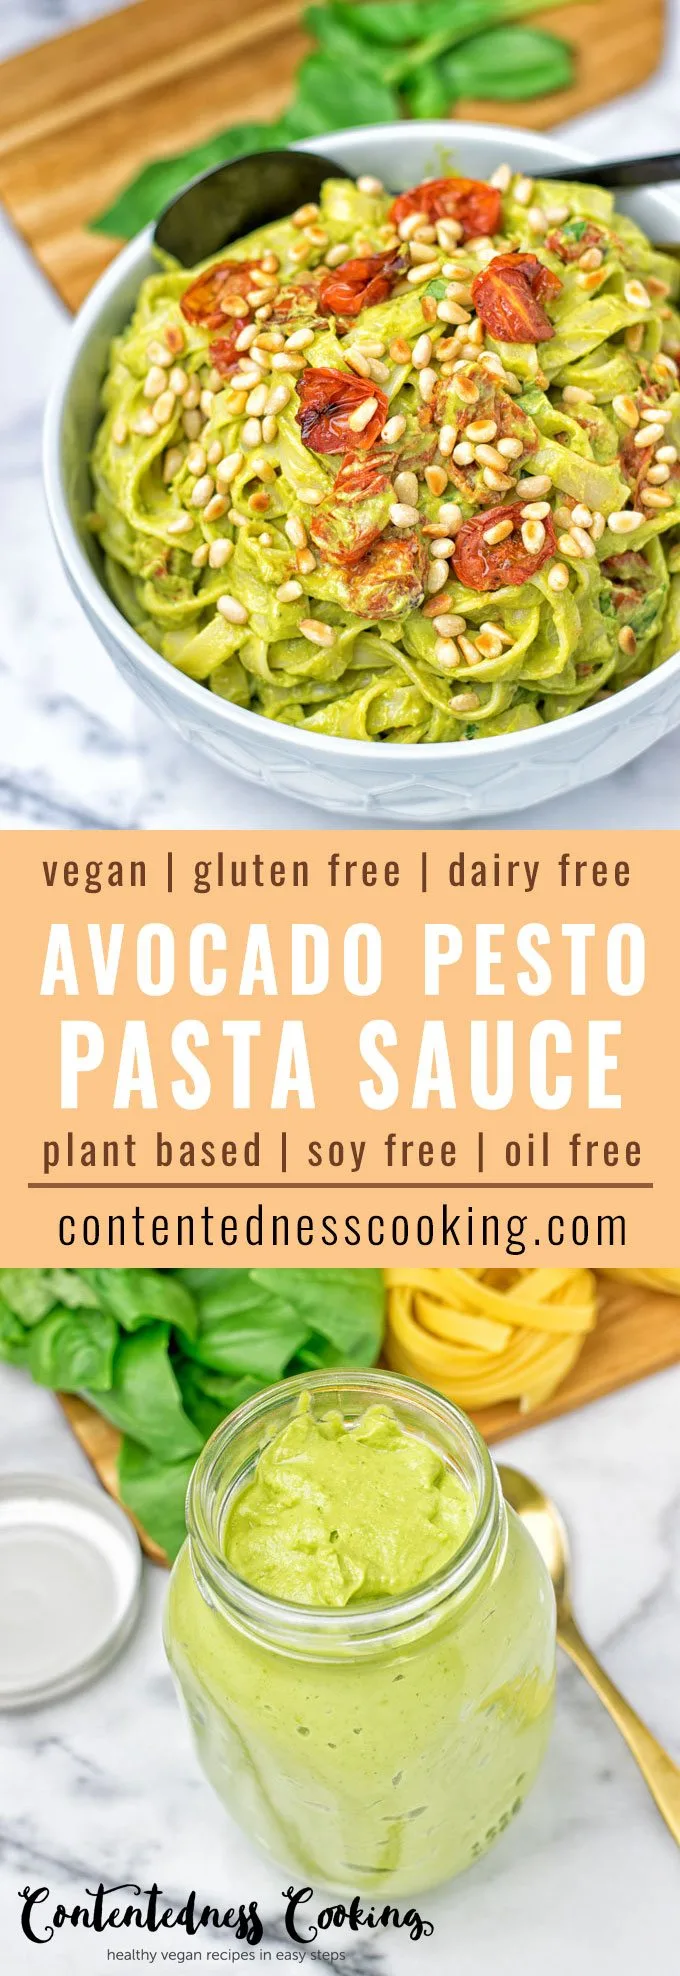 Collage of two pictures of the Avocado Pesto Pasta Sauce with recipe title text.